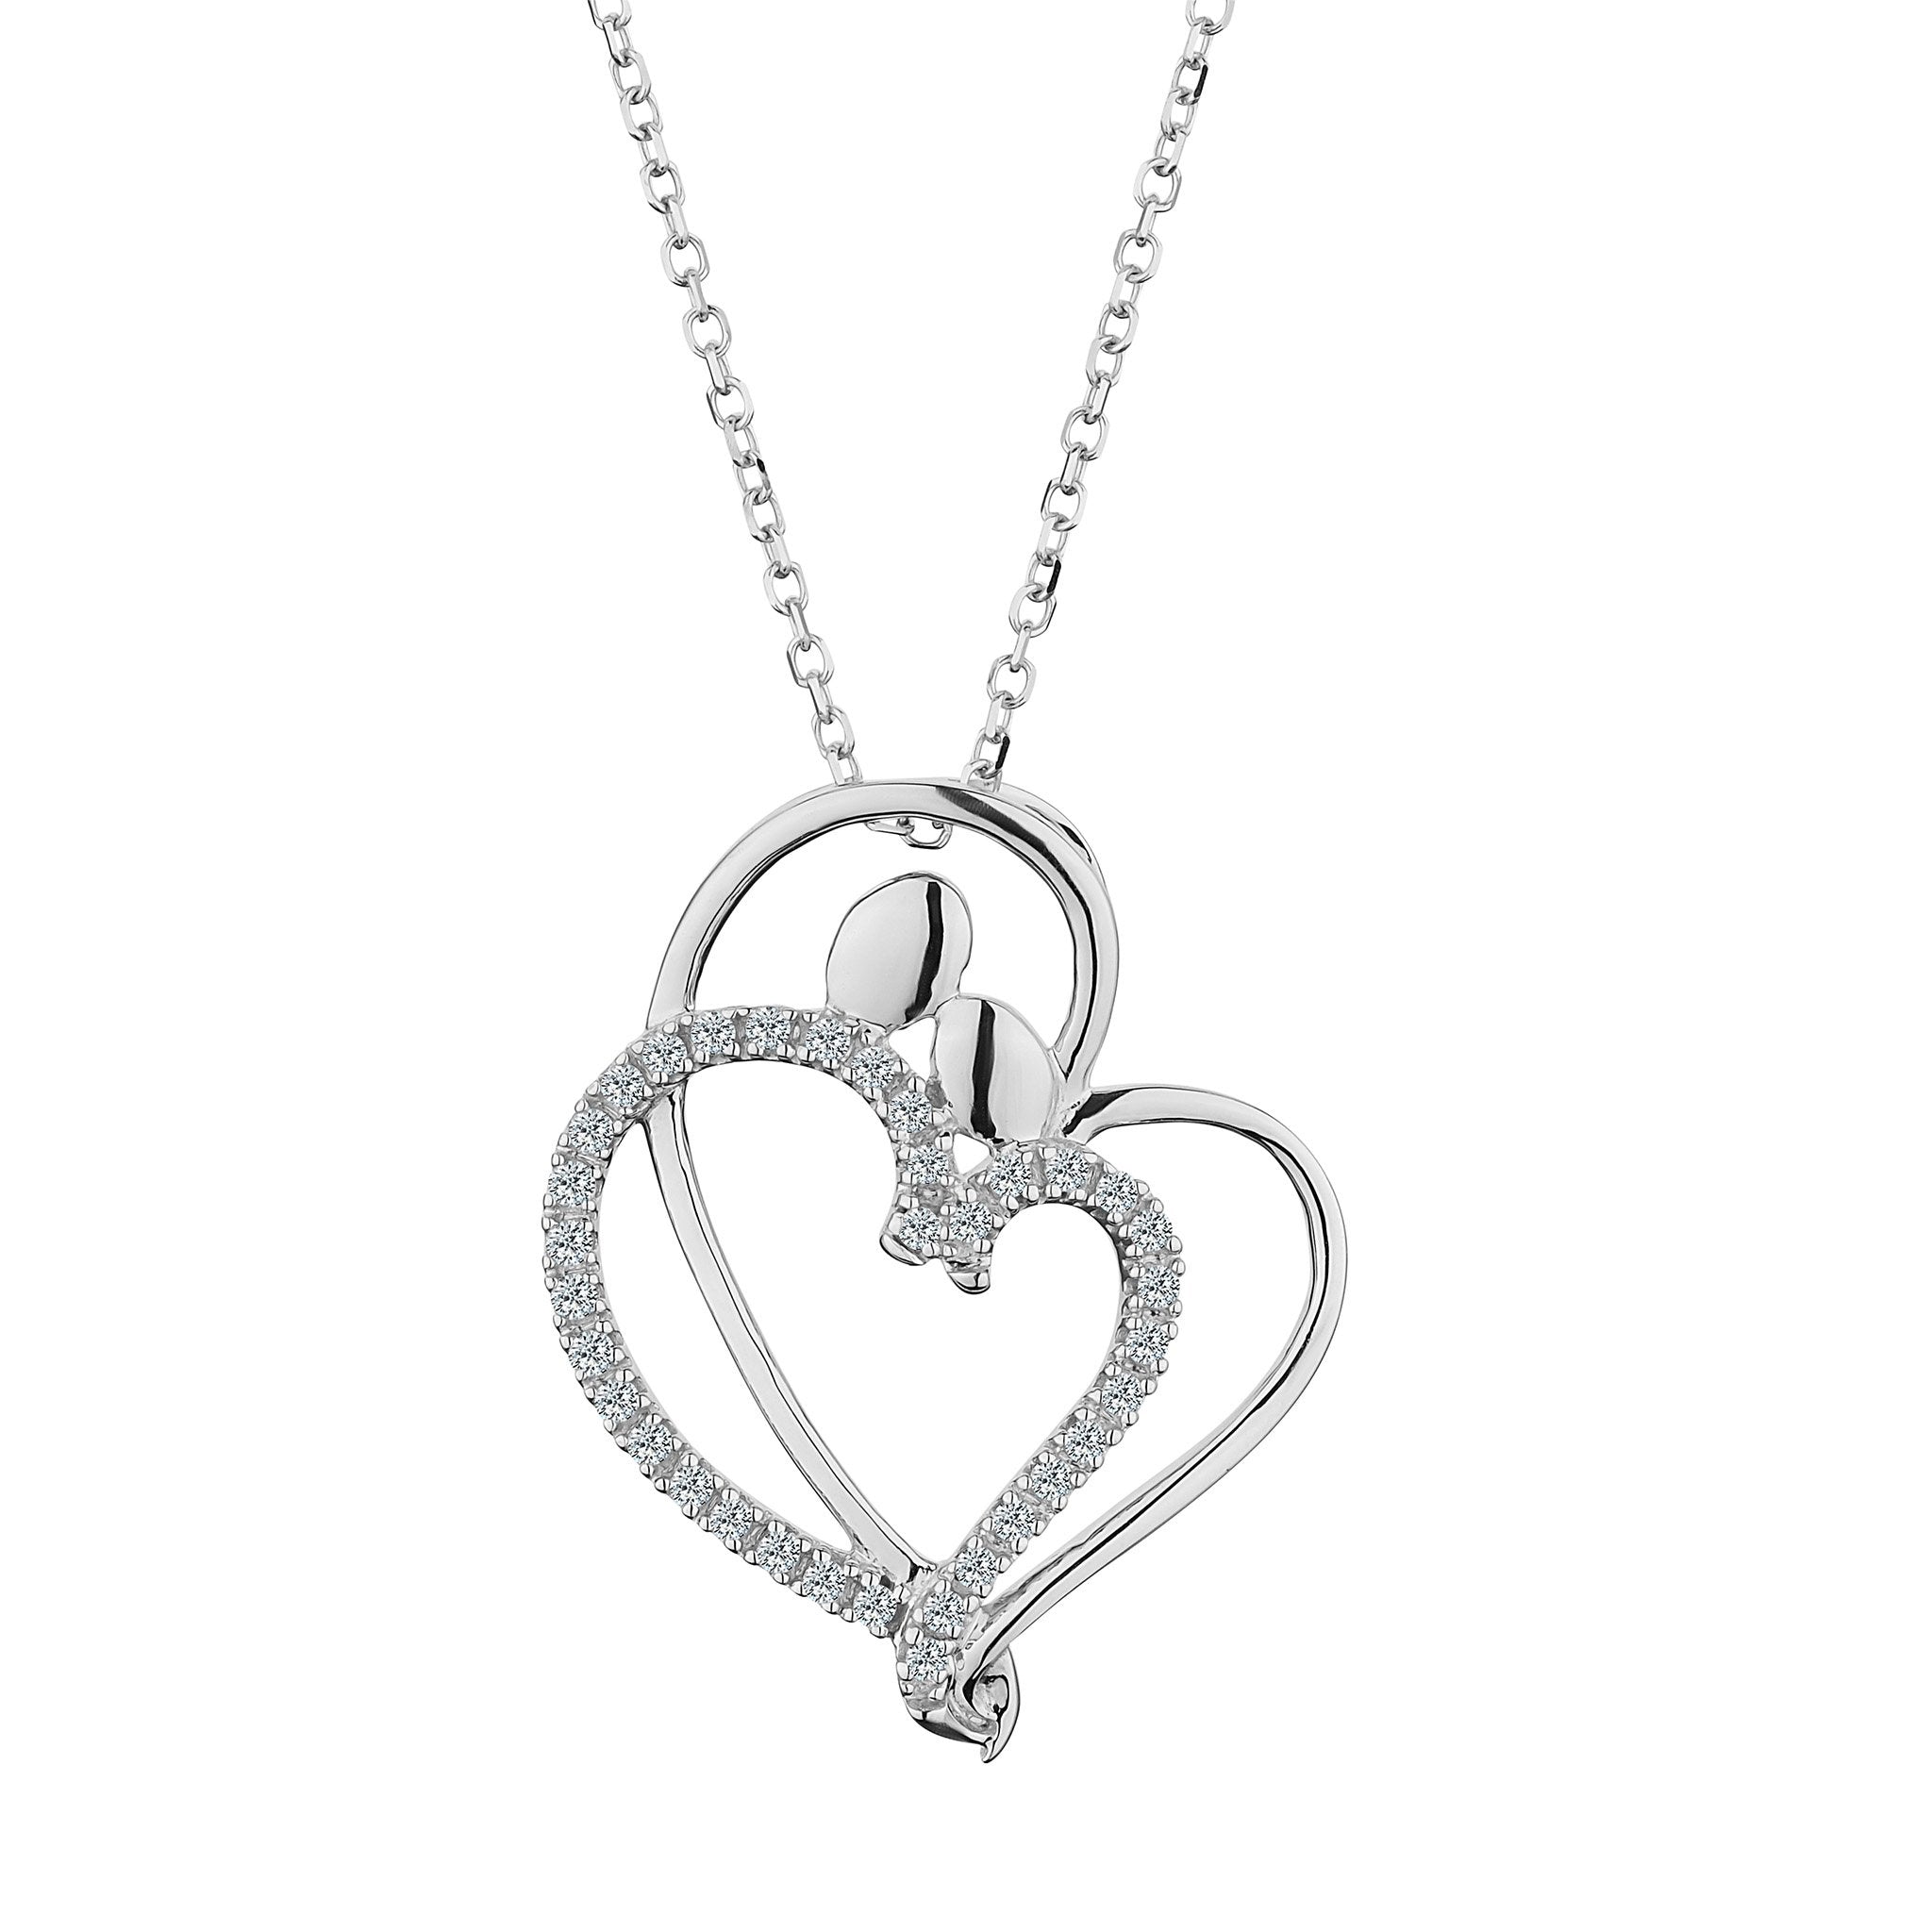 .10 Carat Diamond "Mother And Child" Heart Pendant, 10kt White Gold. Necklaces and Pendants. Griffin Jewellery Designs.